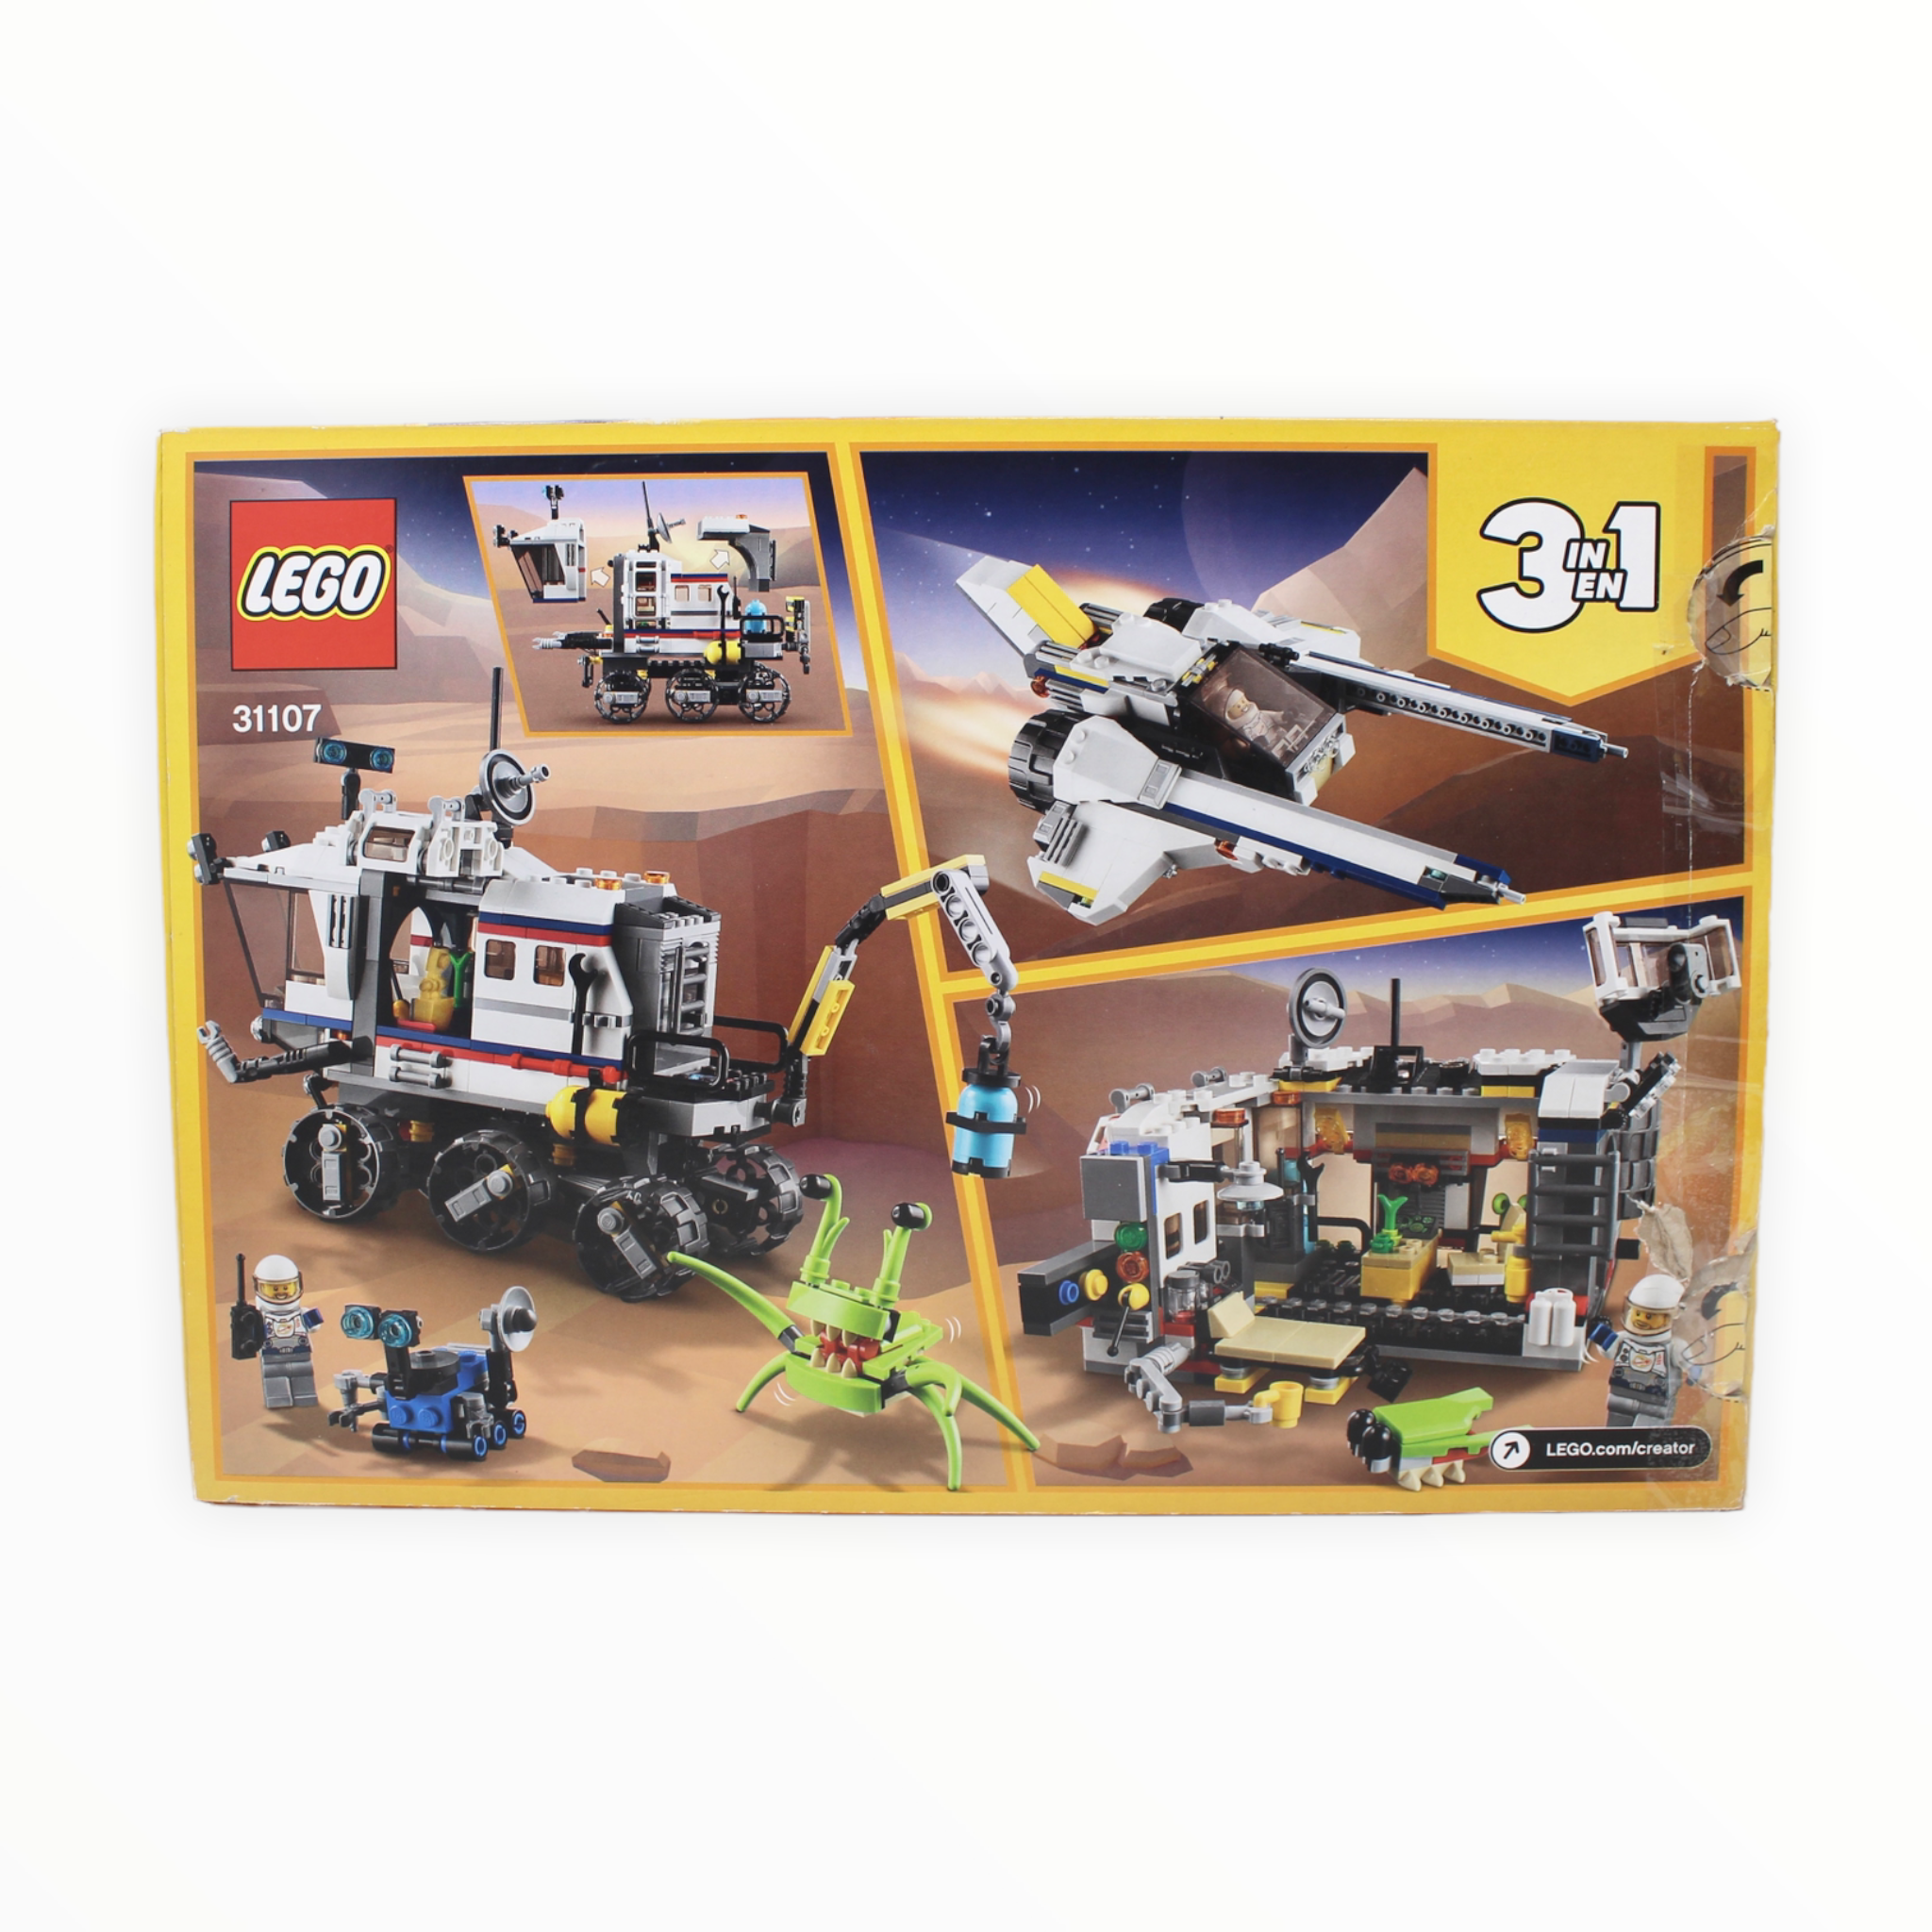 Certified Used Set 31107 Creator Space Rover Explorer